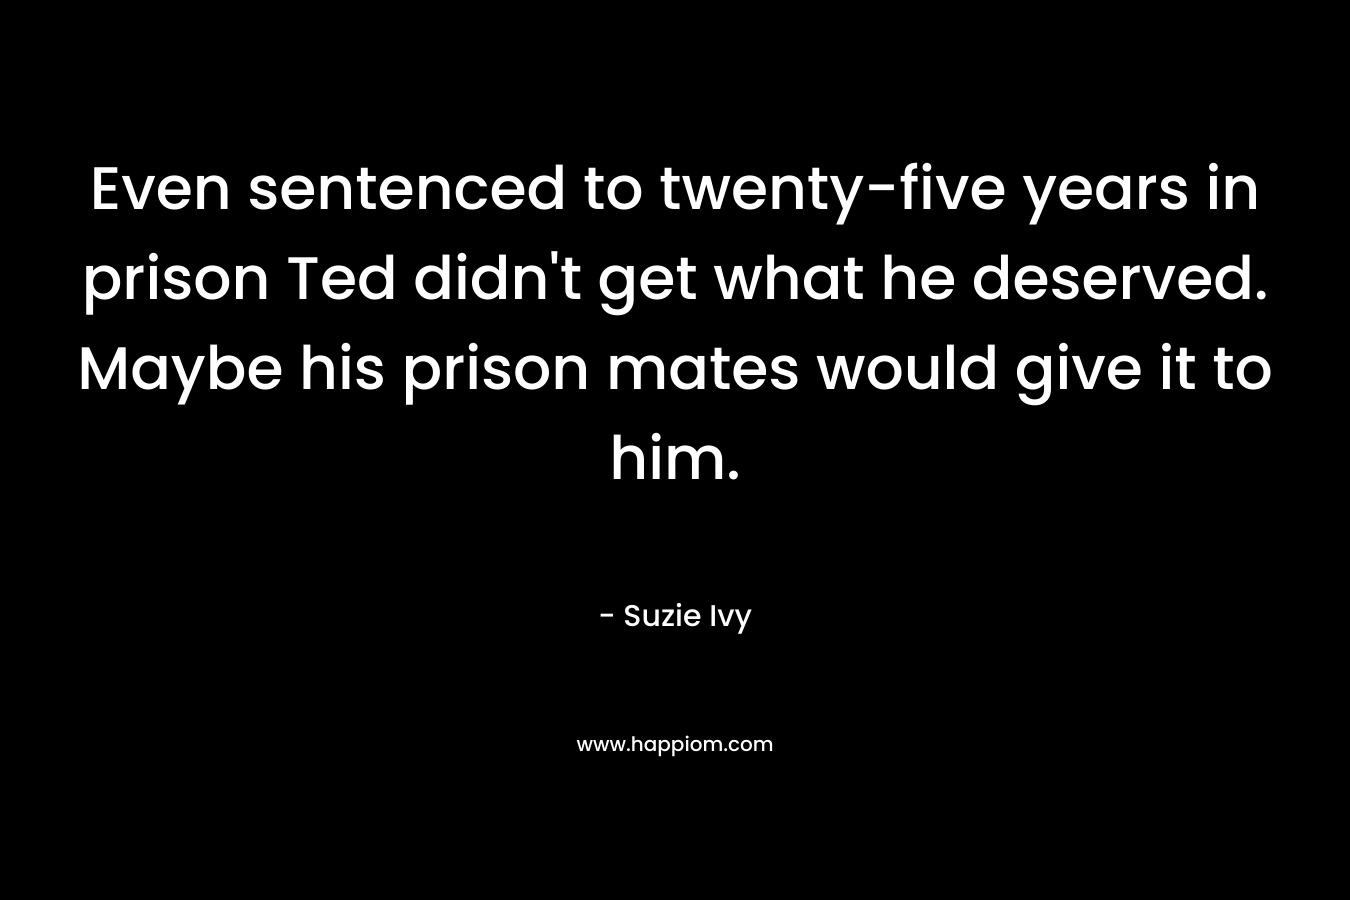 Even sentenced to twenty-five years in prison Ted didn't get what he deserved. Maybe his prison mates would give it to him.